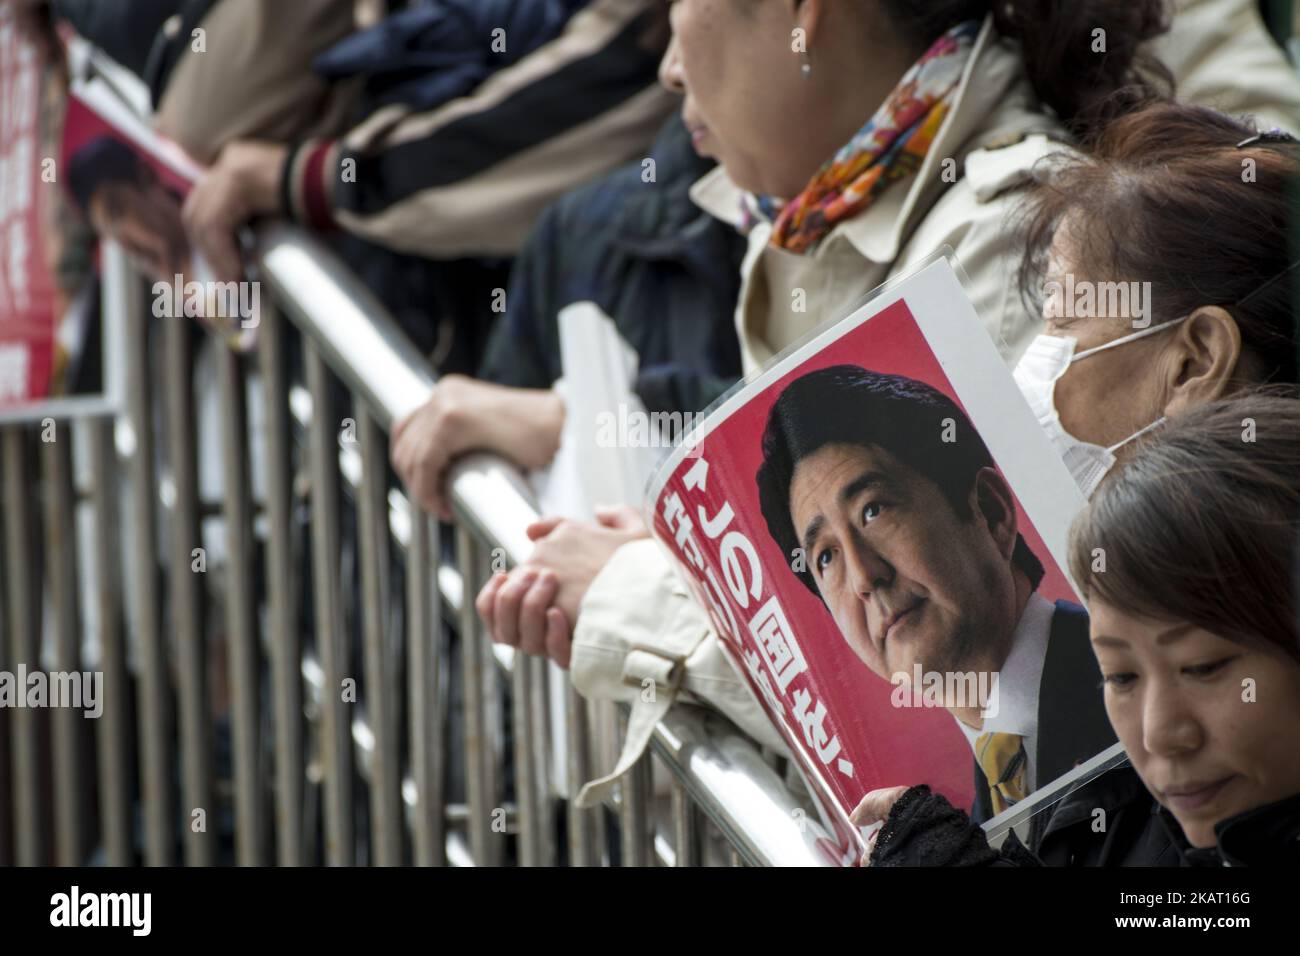 Voters cheer Japanese Prime Minister Shinzo Abe delivering a campaign speech for a candidate of Abe's ruling Liberal Democratic Party during the Lower House election campaign in Fujisawa, Kanazawa Prefecture, south of Tokyo Japan, 20 October 2017. The election will be voted on 22 October while the ruling Liberal Democratic Party coalition is facing challenge of new opposition parties form. (Photo by Alessandro Di Ciommo/NurPhoto) Stock Photo